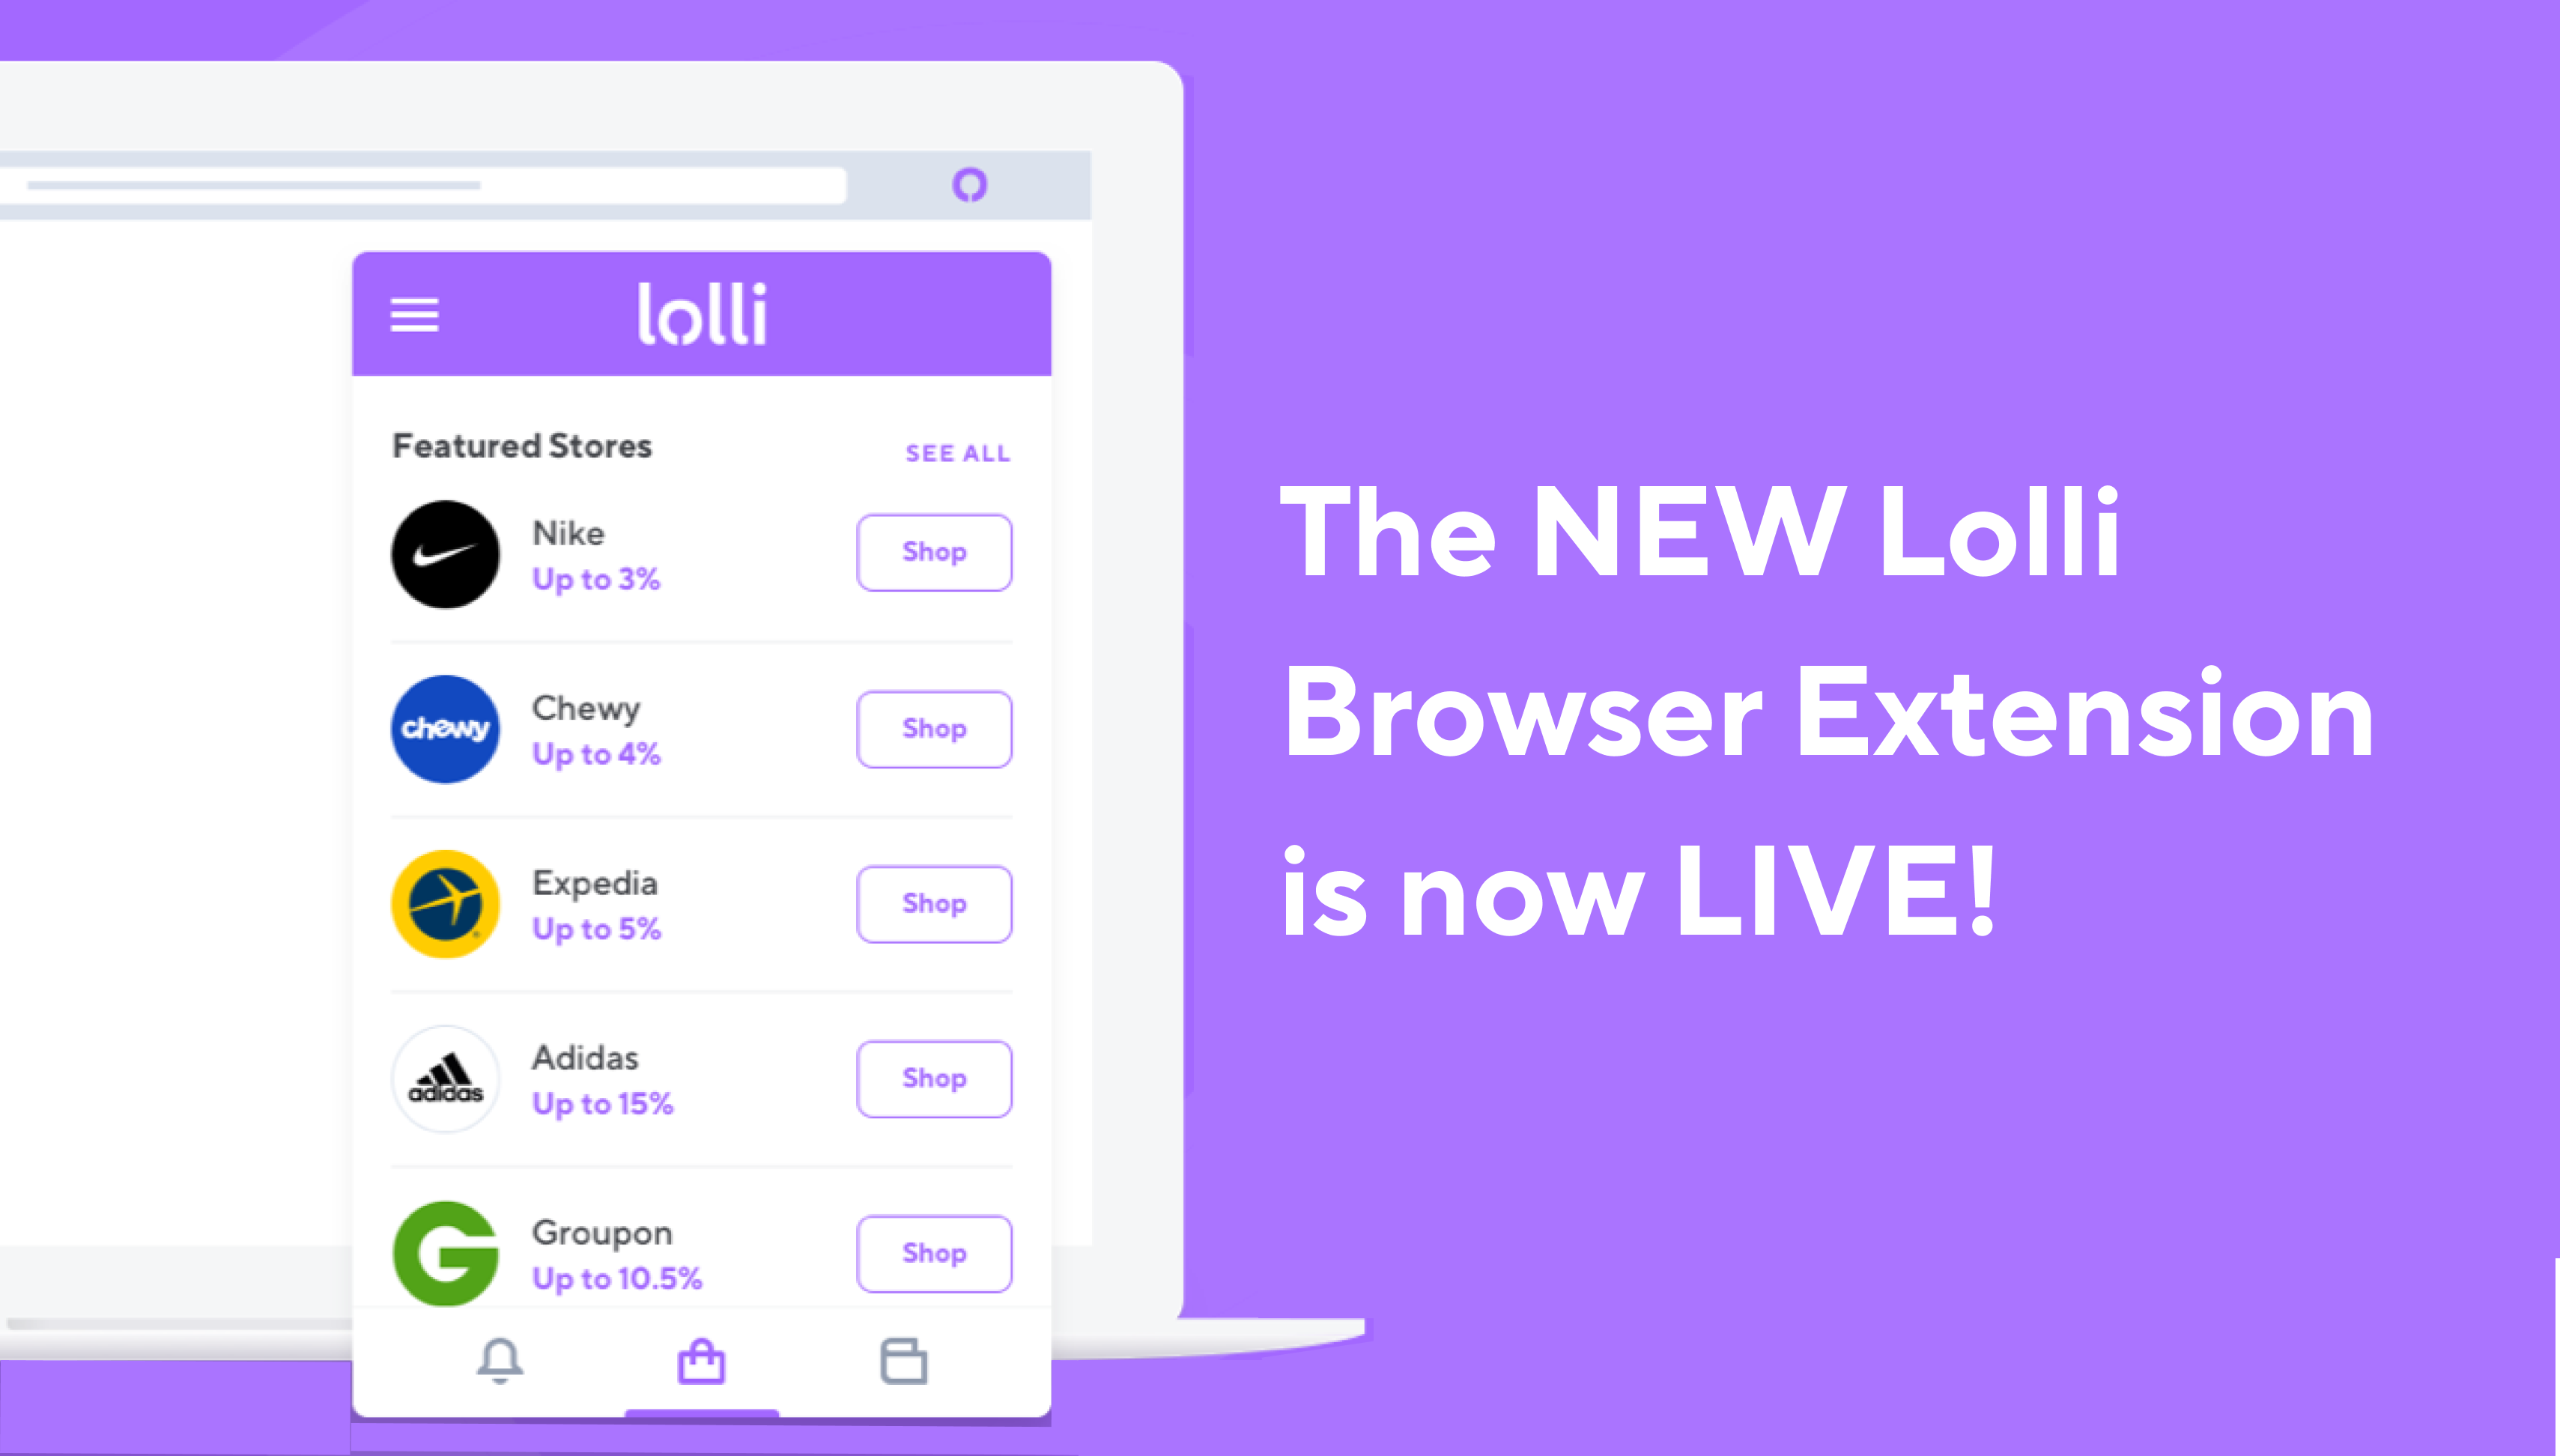 Discover the NEW Lolli Browser Extension!